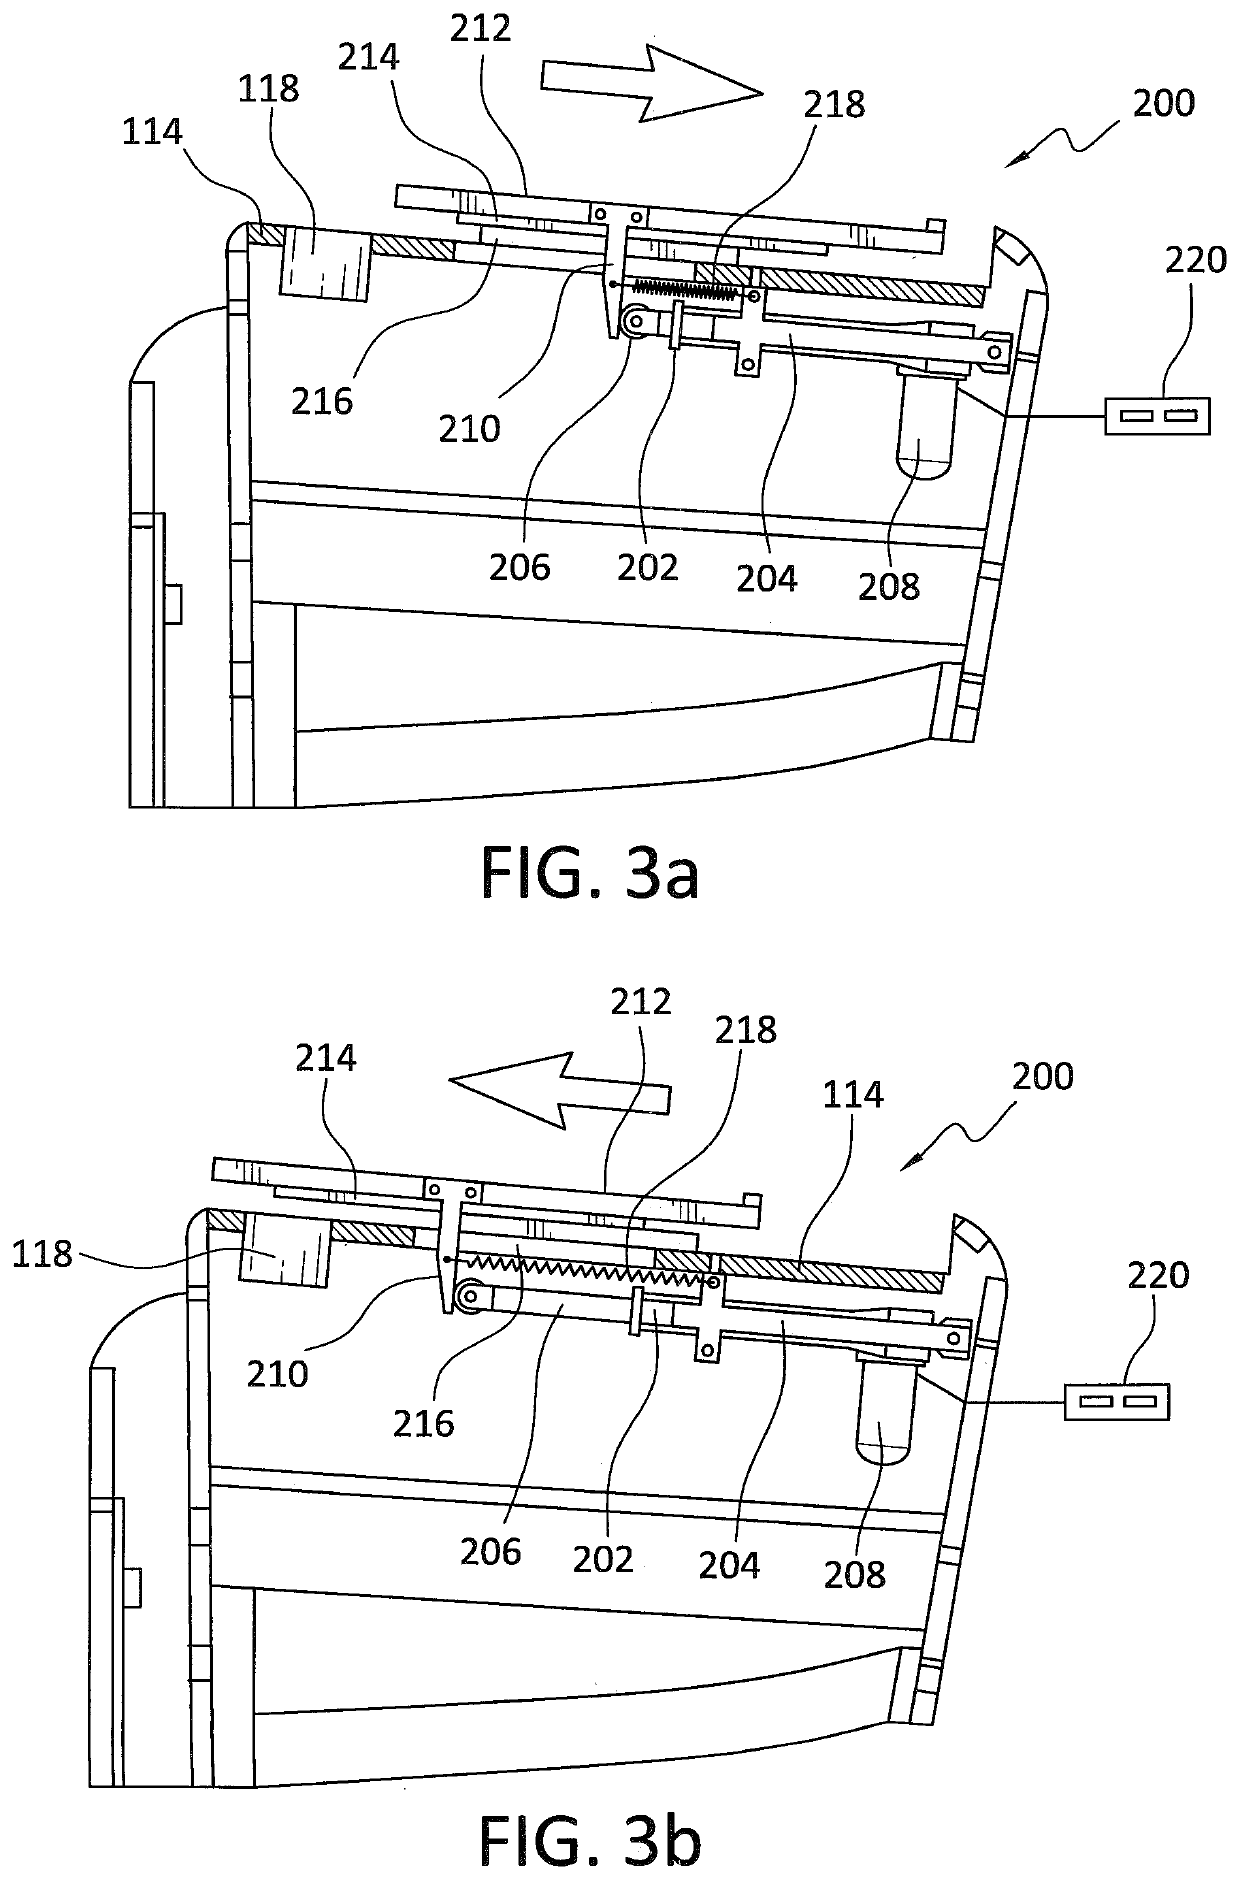 Upper sliding arm portion of a lounger chair, and a motorized mechanism for moving the upper sliding arm portion forwardly so as to cover a storage receptacle defined within a lower fixed arm portion of the chair, and for moving the upper sliding arm portion rearwardly so as to uncover the storage receptacle